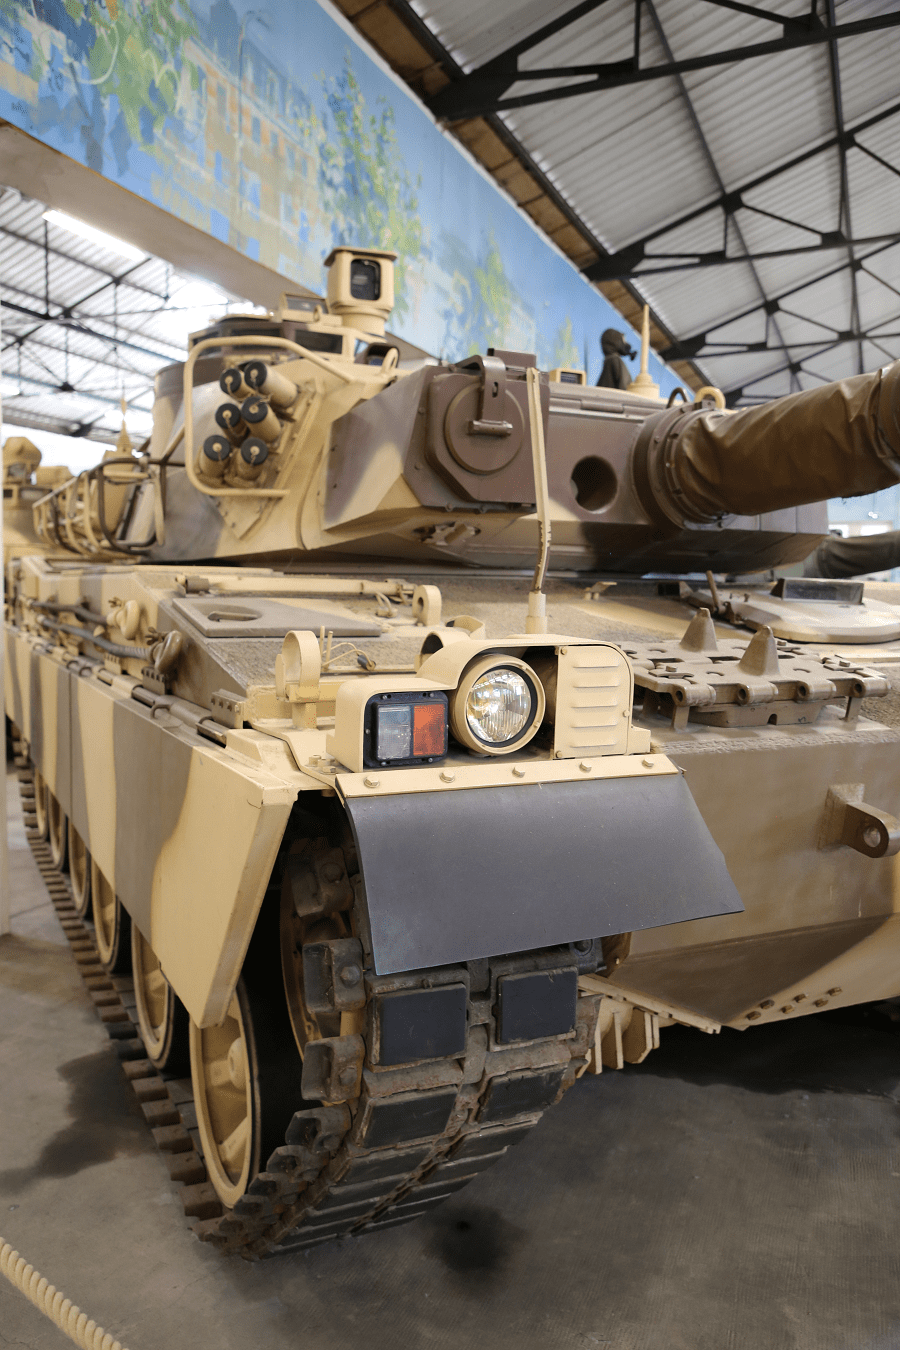 AMX 40 - a French prototype main battle tank developed by GIAT • All